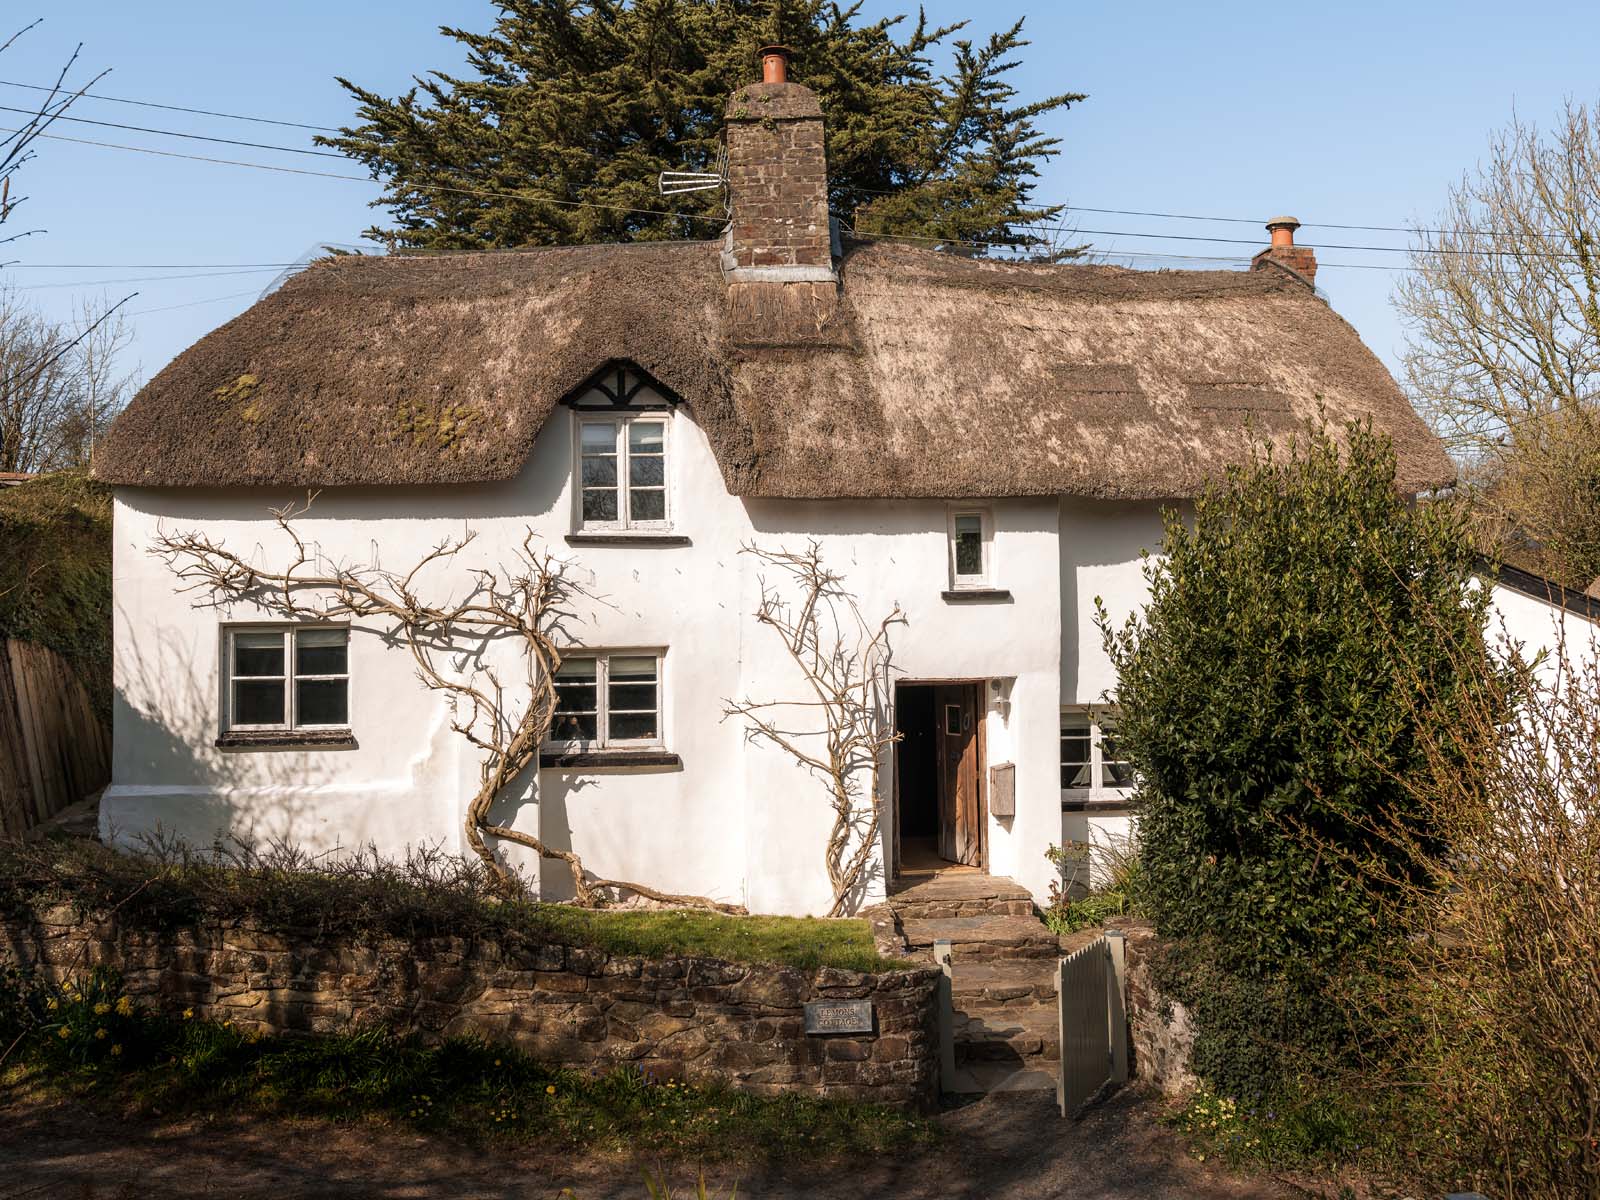 The front exterior of the cottage in the sun